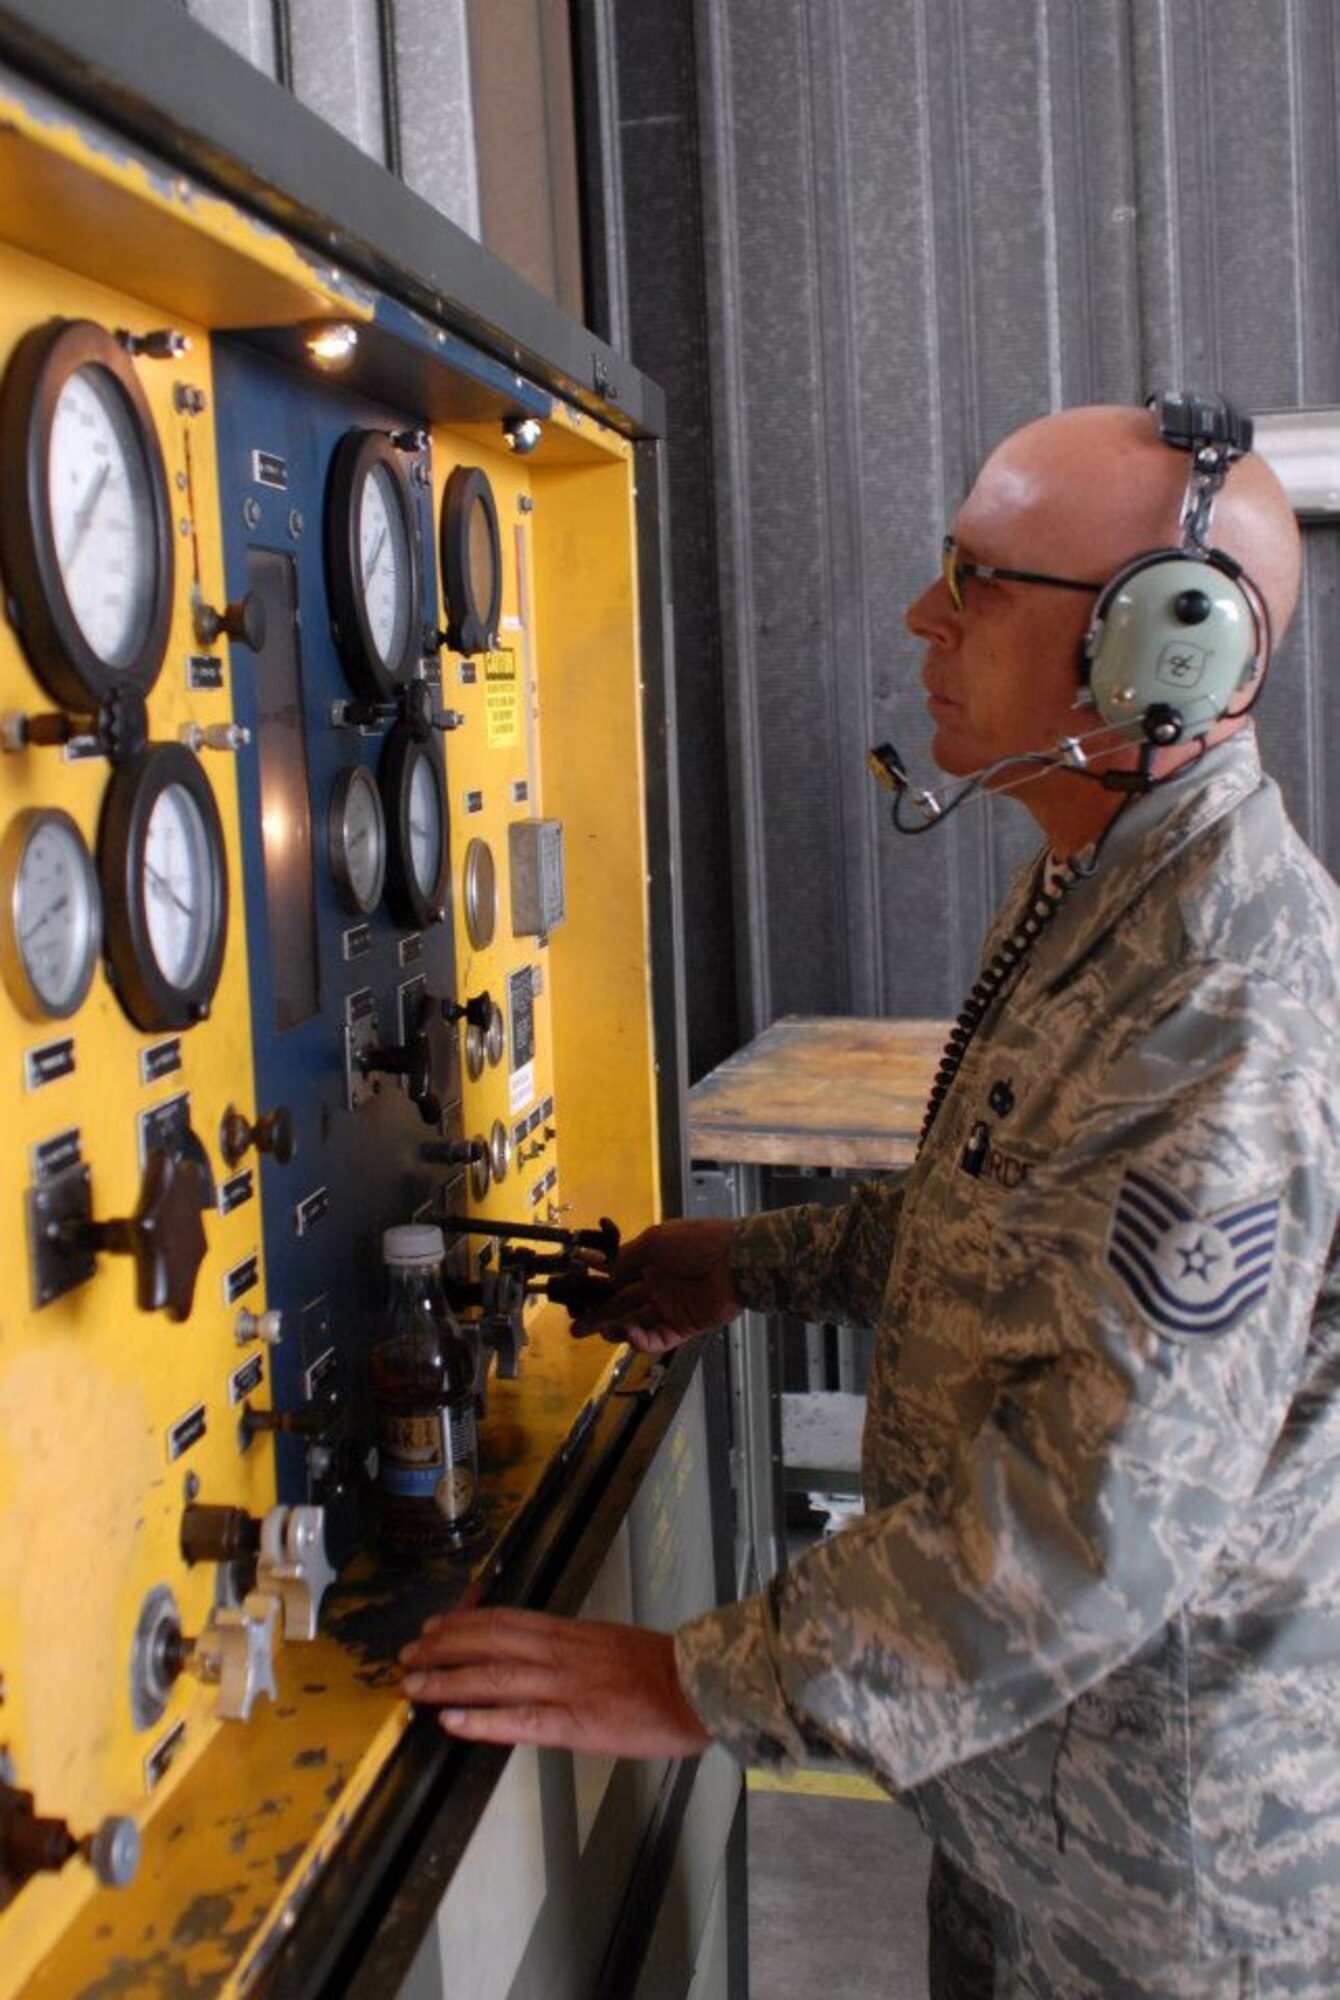 Tech Sgt. Edmund Poitinger a pneudraulics mechanic from the 180th Fighter Wing in Toledo, Ohio, operates a hydraulic test stand while troubleshooting a landing gear problem for an F16 in Great Falls, Montana, August 3, 2012. Members of the 180FW travelled to Great Falls, Montana to participate in exercise “Hang em’ High” to practice dissimilar air combat training. (U.S. Air Force photo by Staff Sgt. Stephen Reddick/Released)